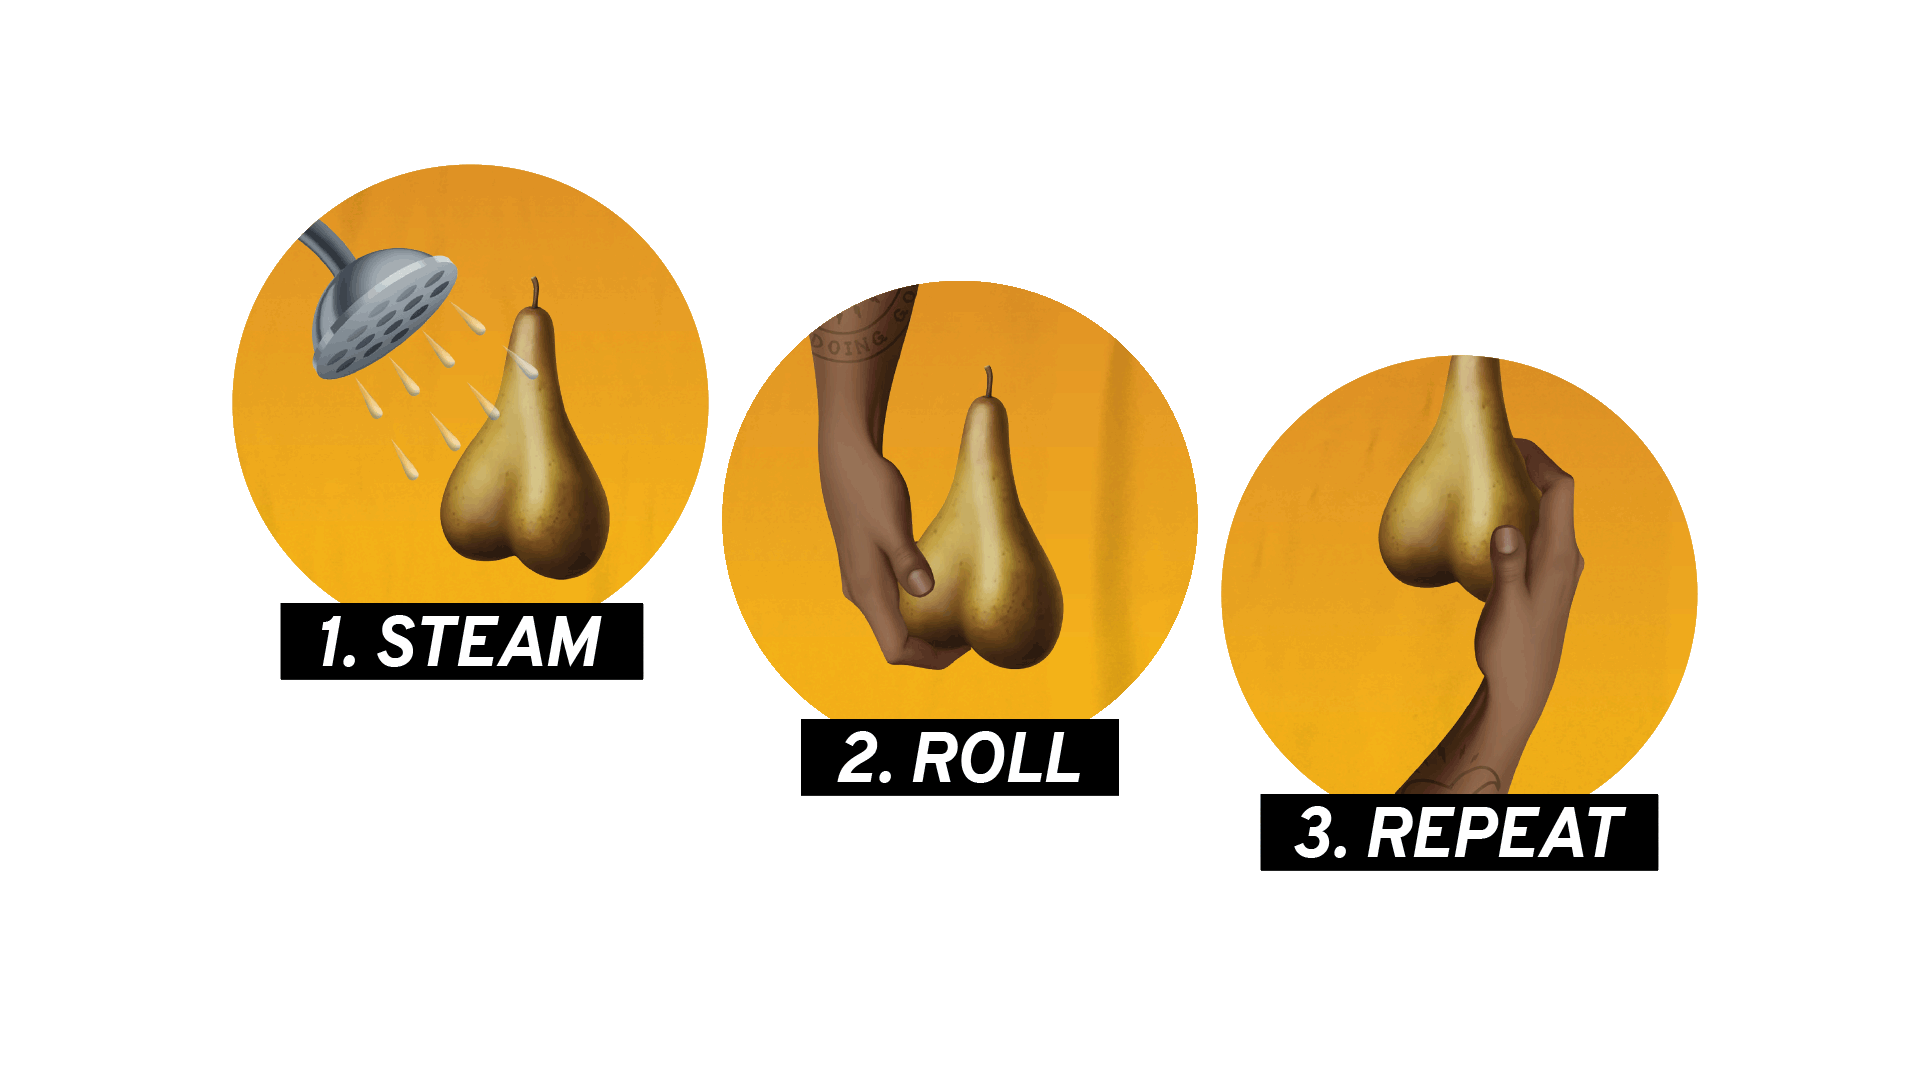 An infographic demonstrating how to check your nuts in 3 steps